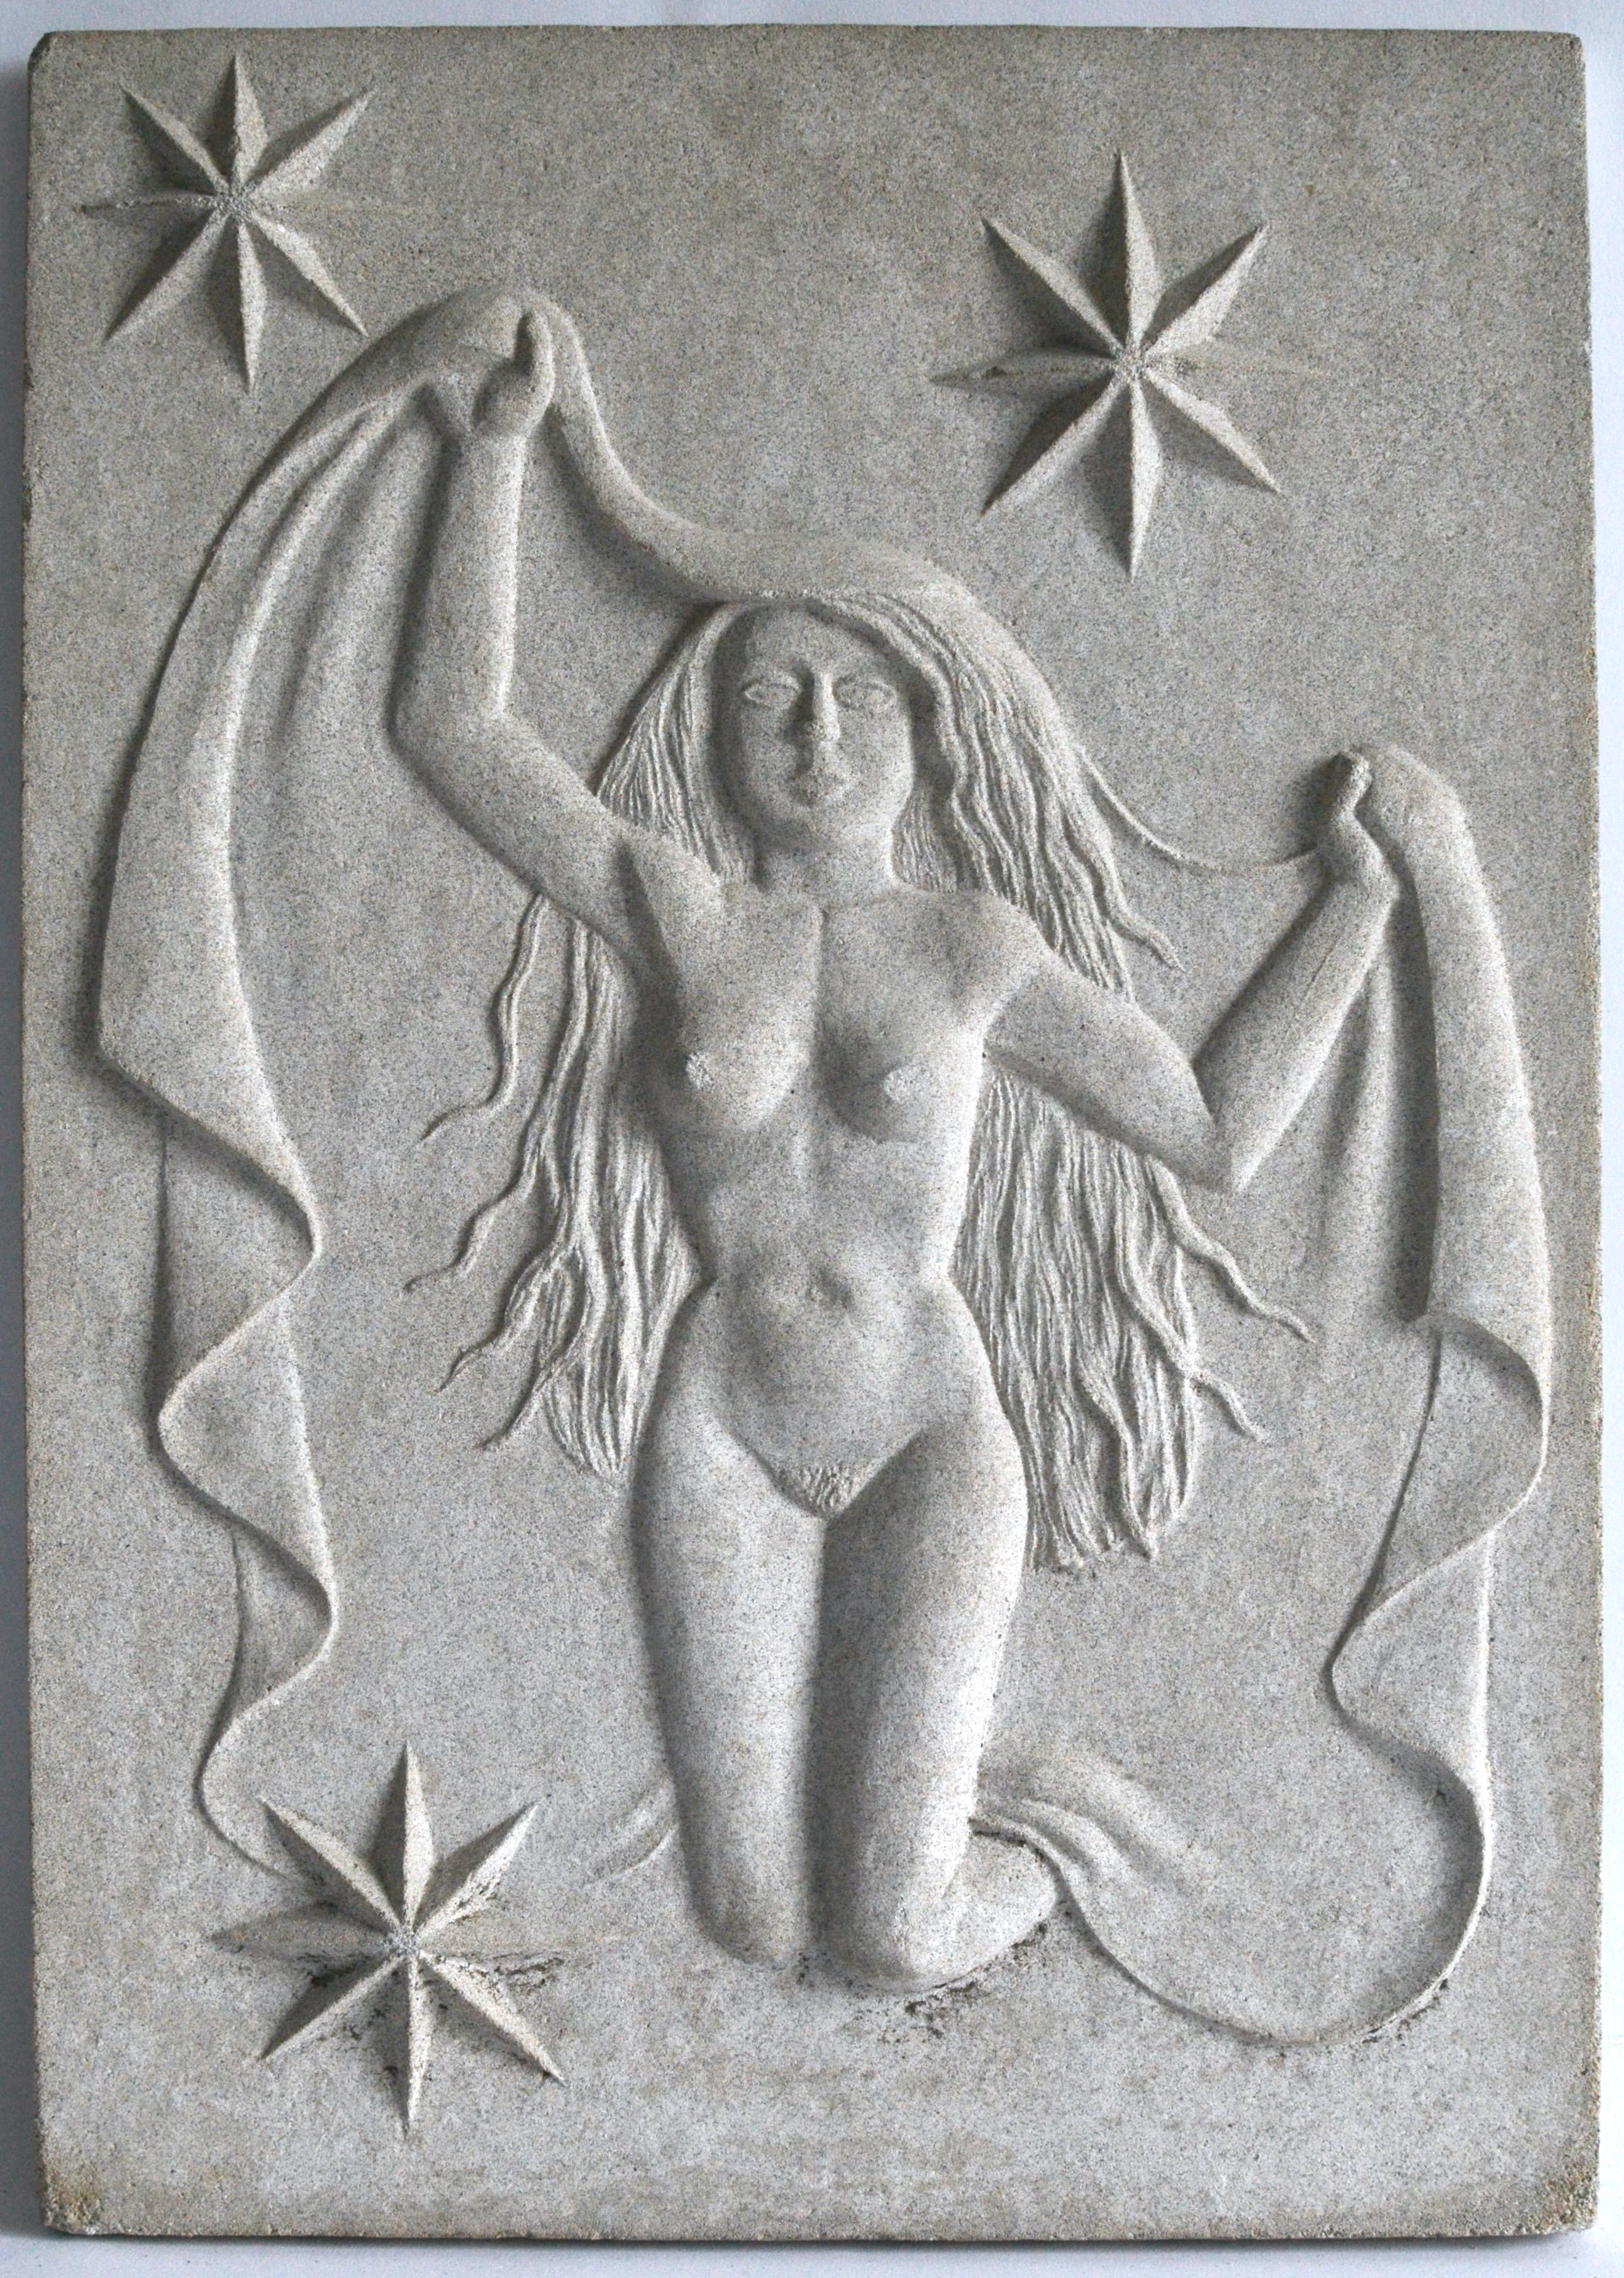 Eight (7) cast zodiac artificial stone reliefs, c. 1940-1950 by sculptor Manne Östlund (1904-1957) 

They can be sold separately.